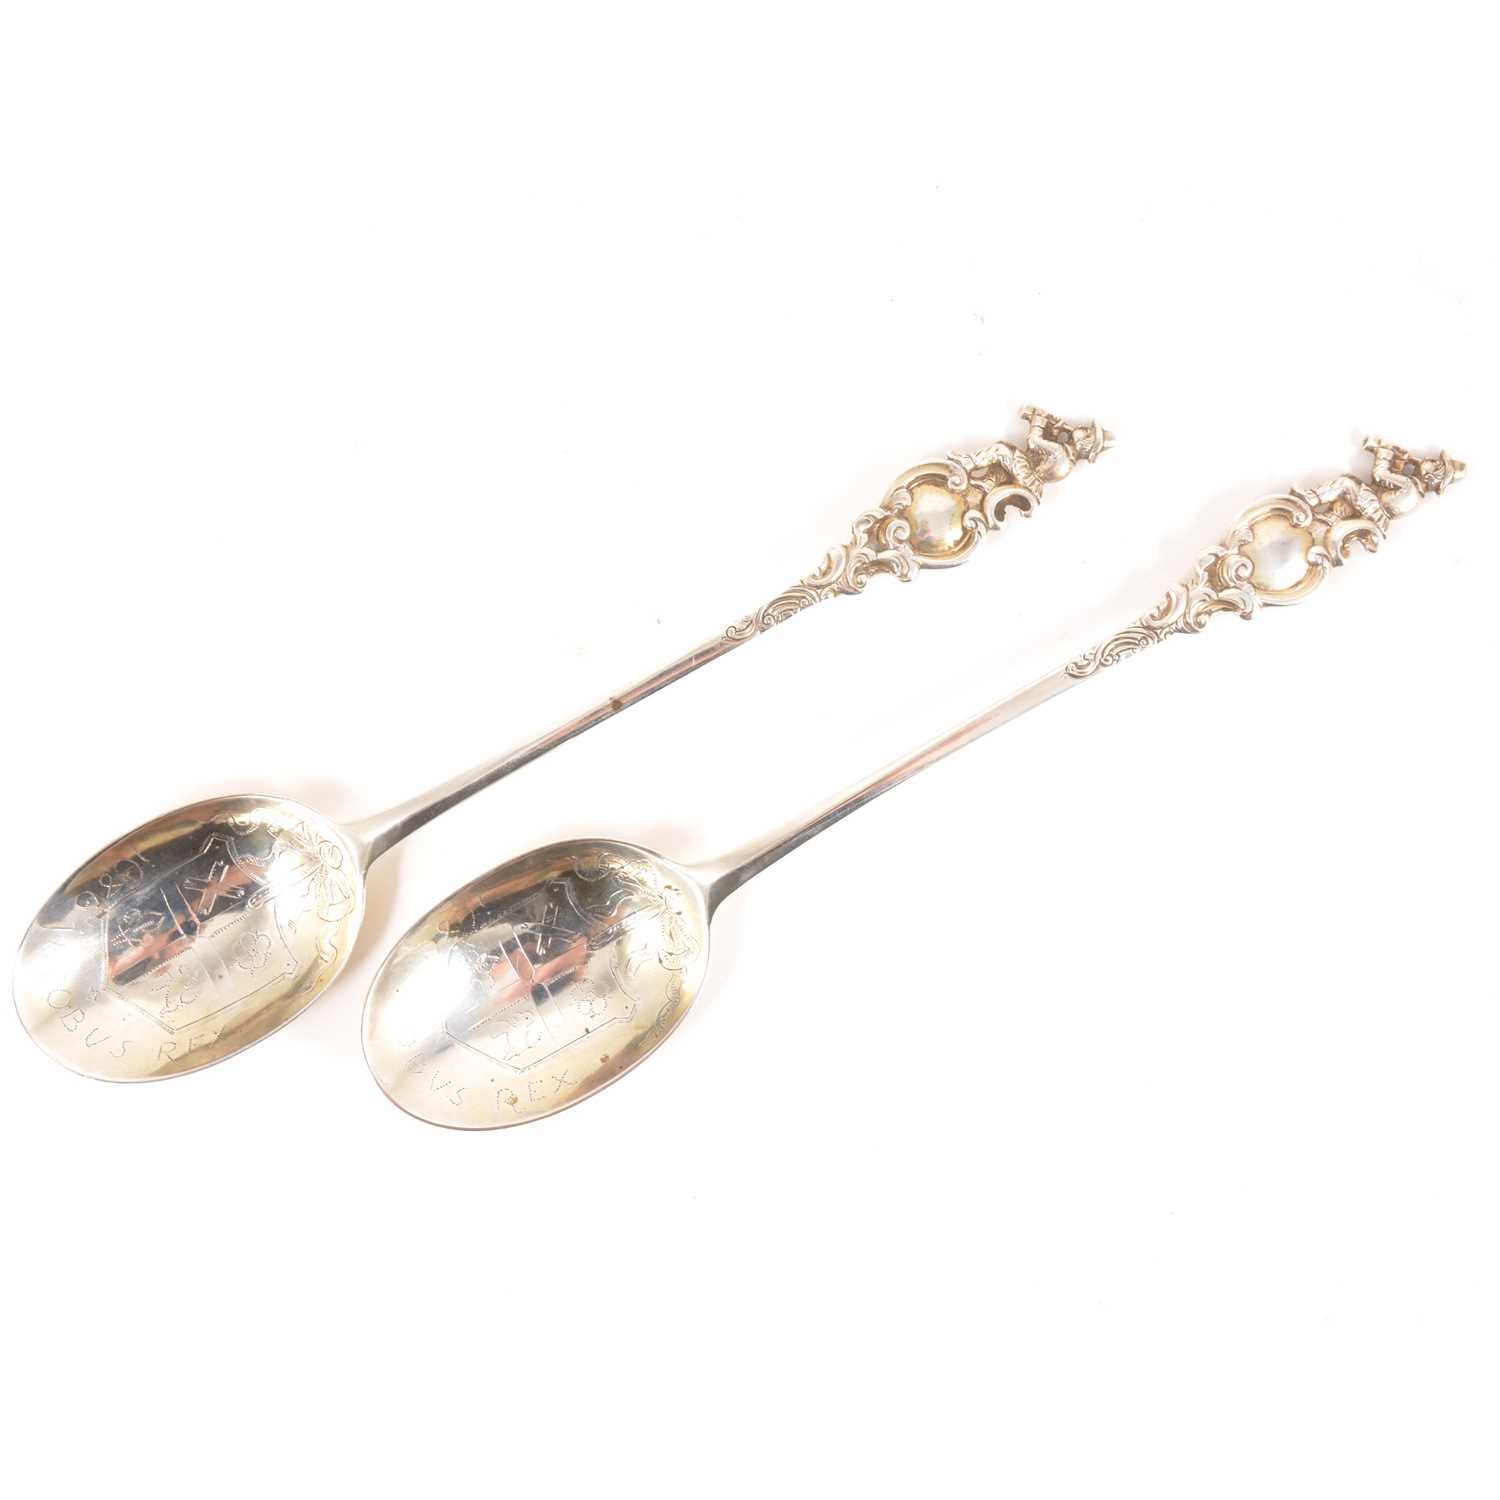 Lot 51 - A pair of silver table spoons